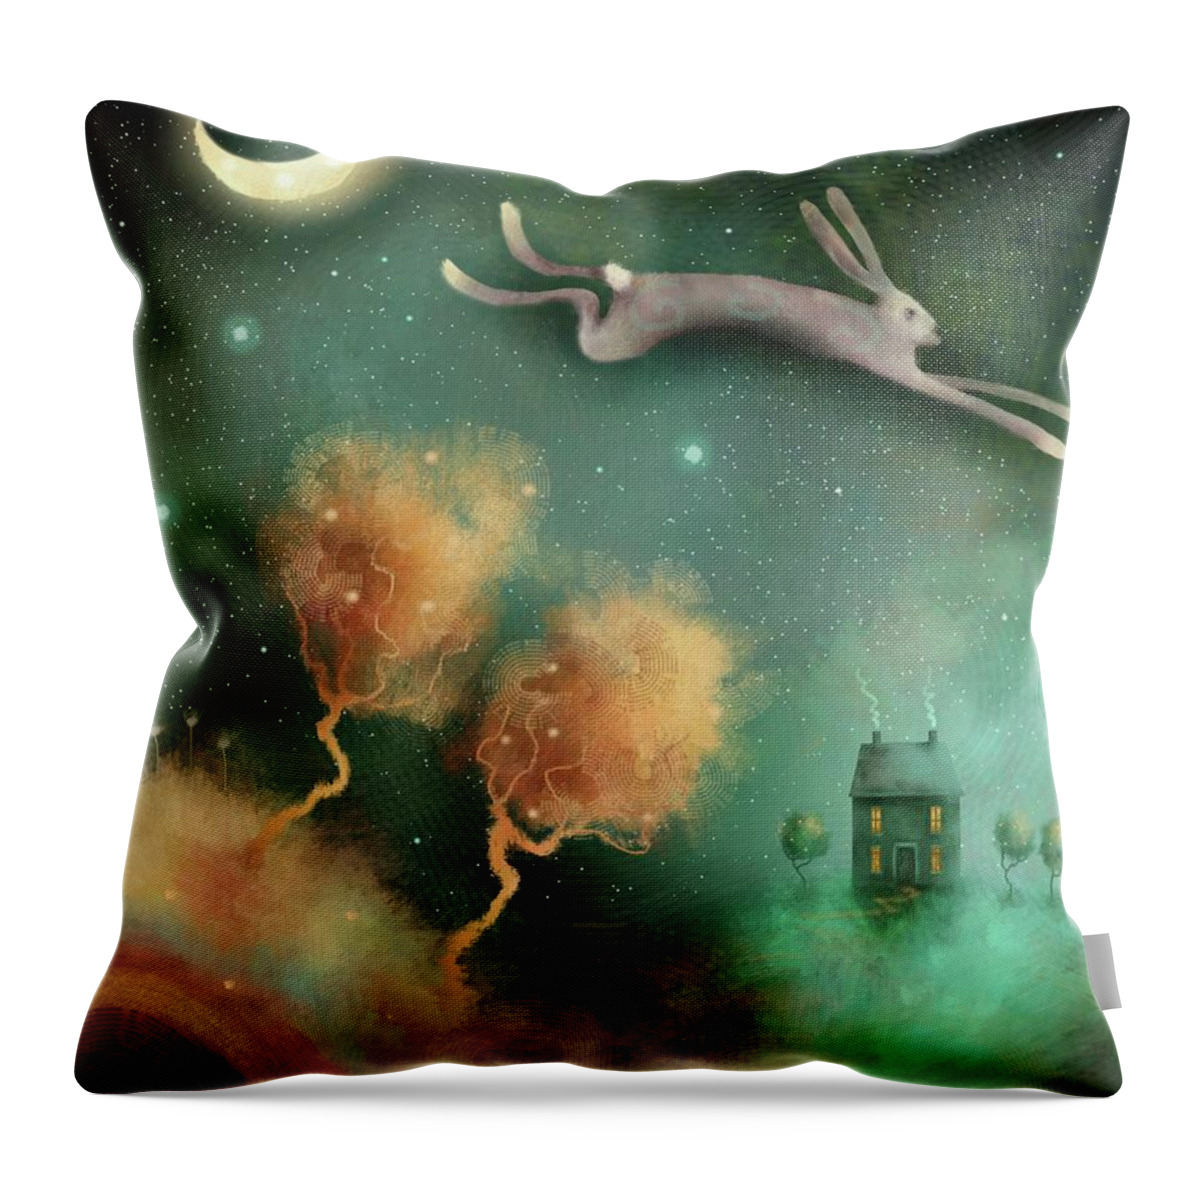 Landscape Throw Pillow featuring the painting Racing The Moon by Joe Gilronan